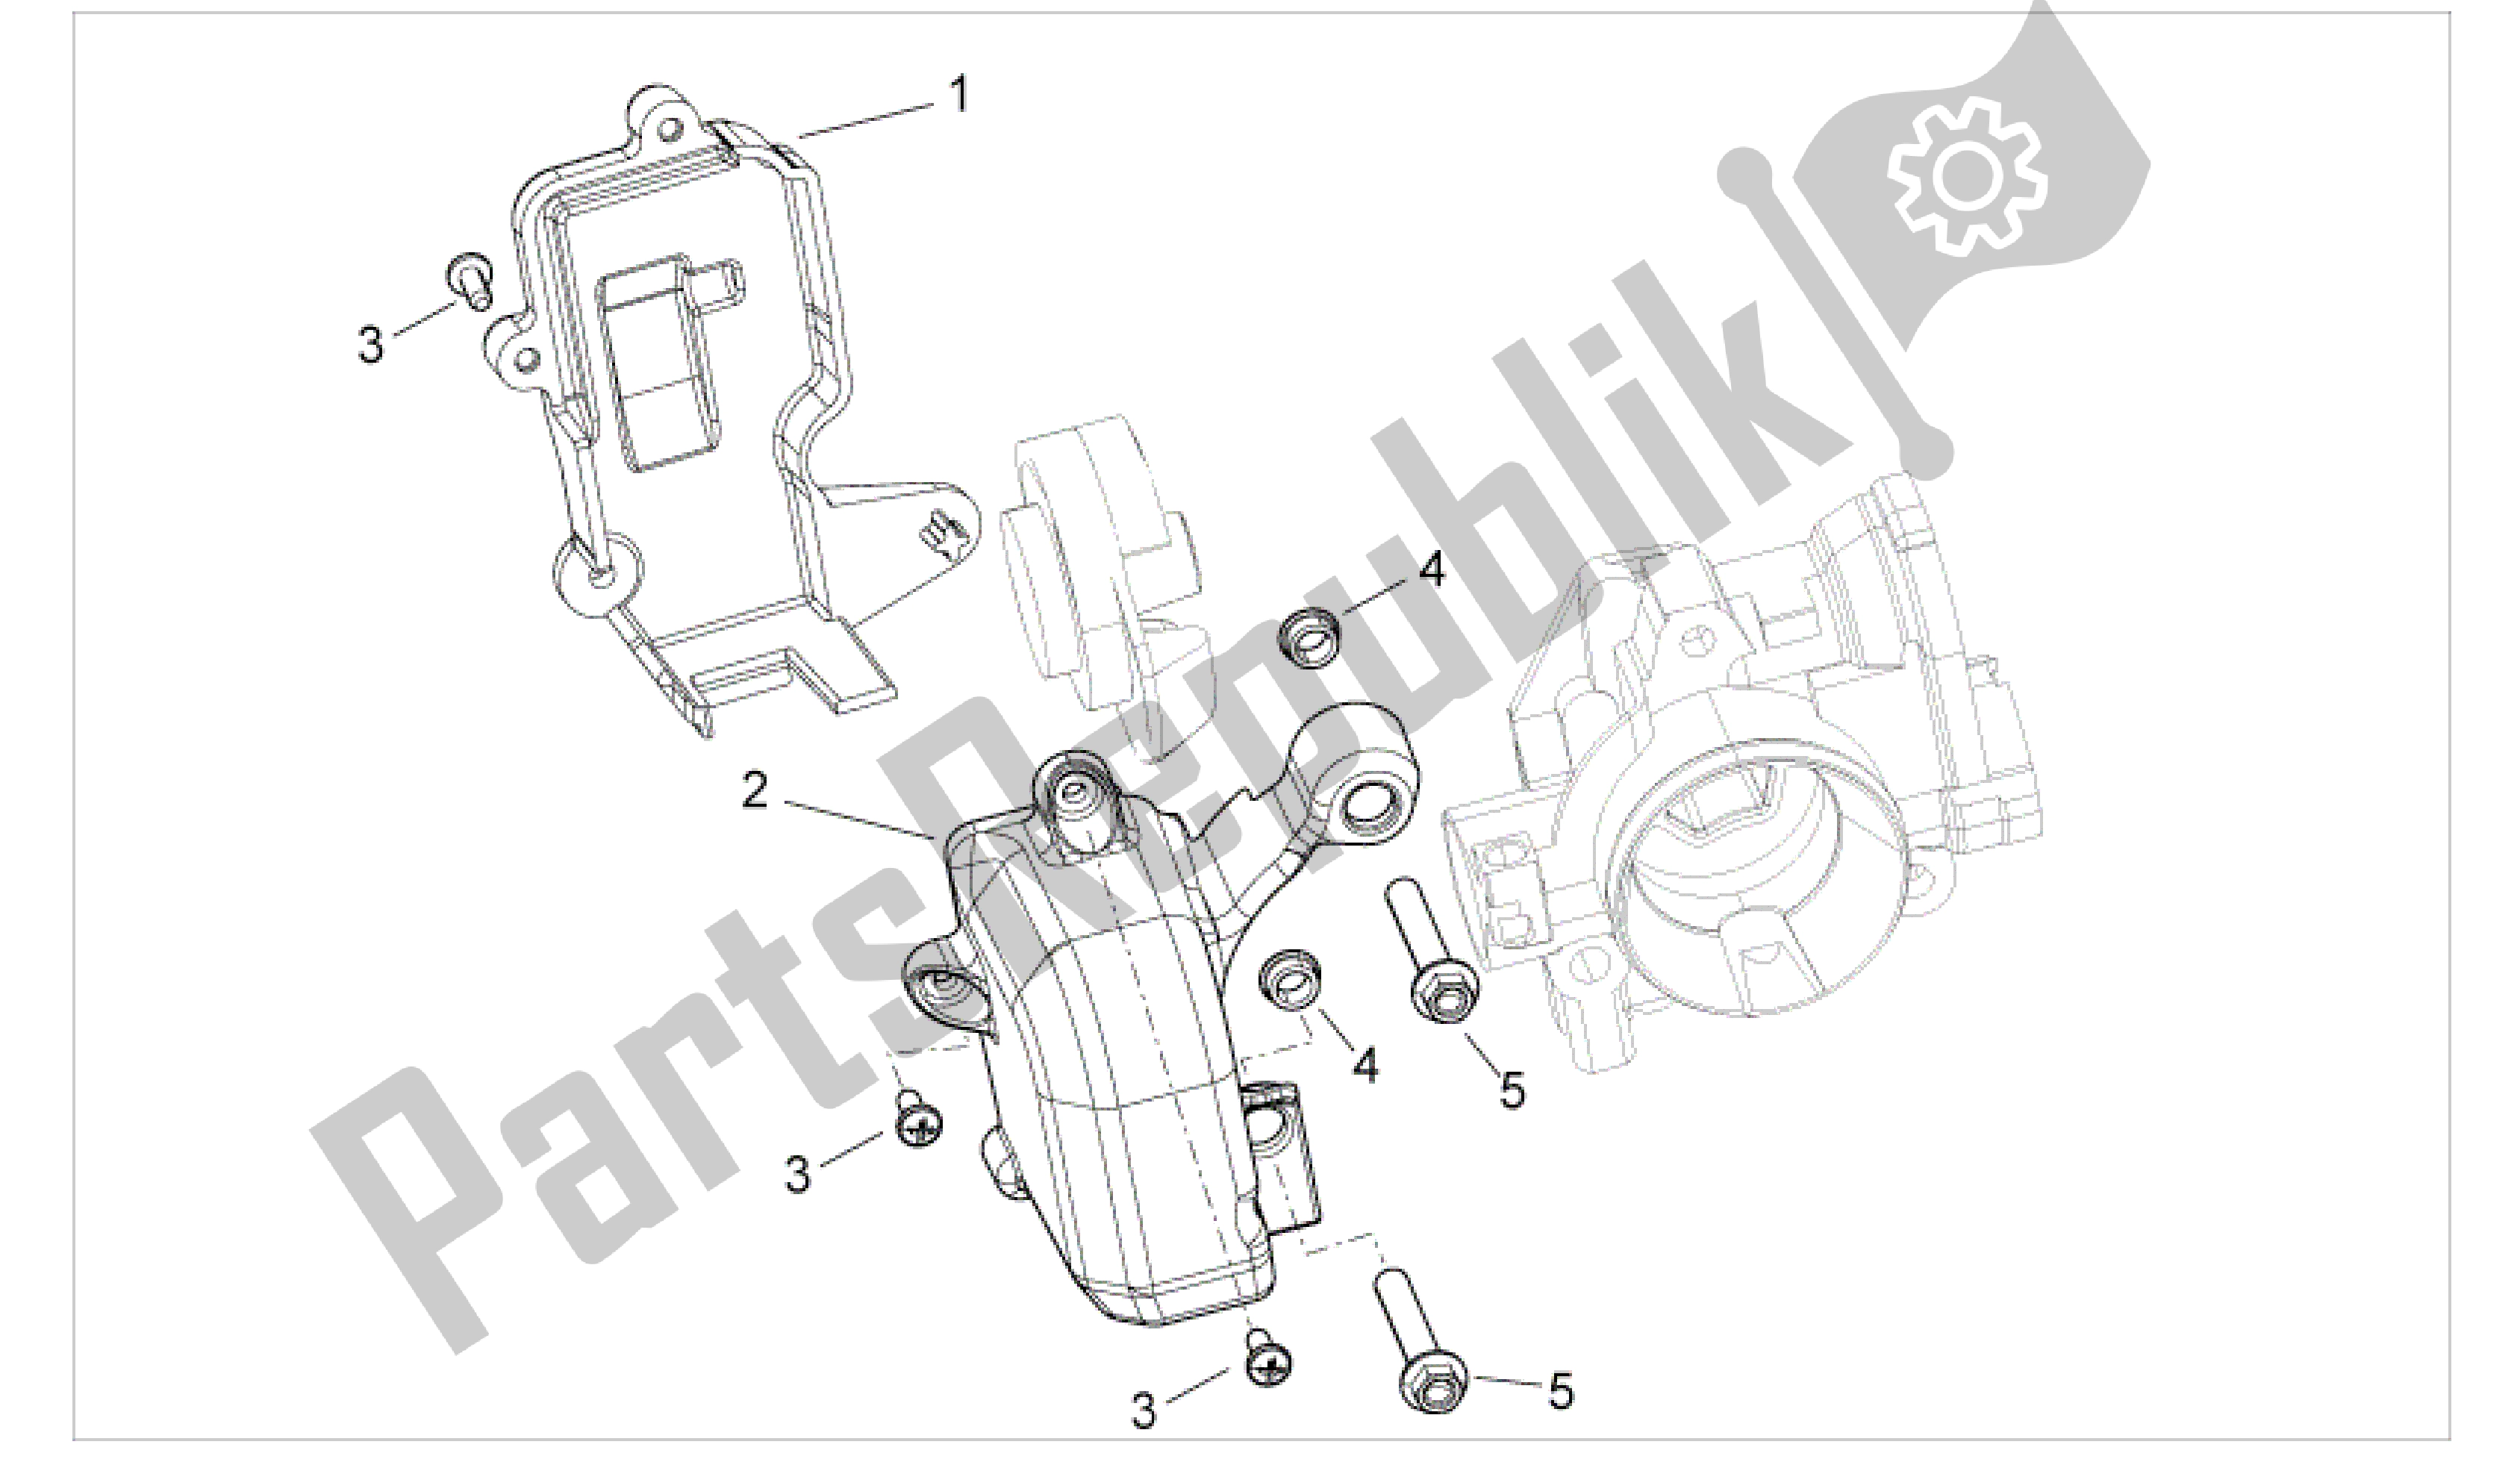 All parts for the Throttle Body Protection of the Aprilia Mana 850 2009 - 2011